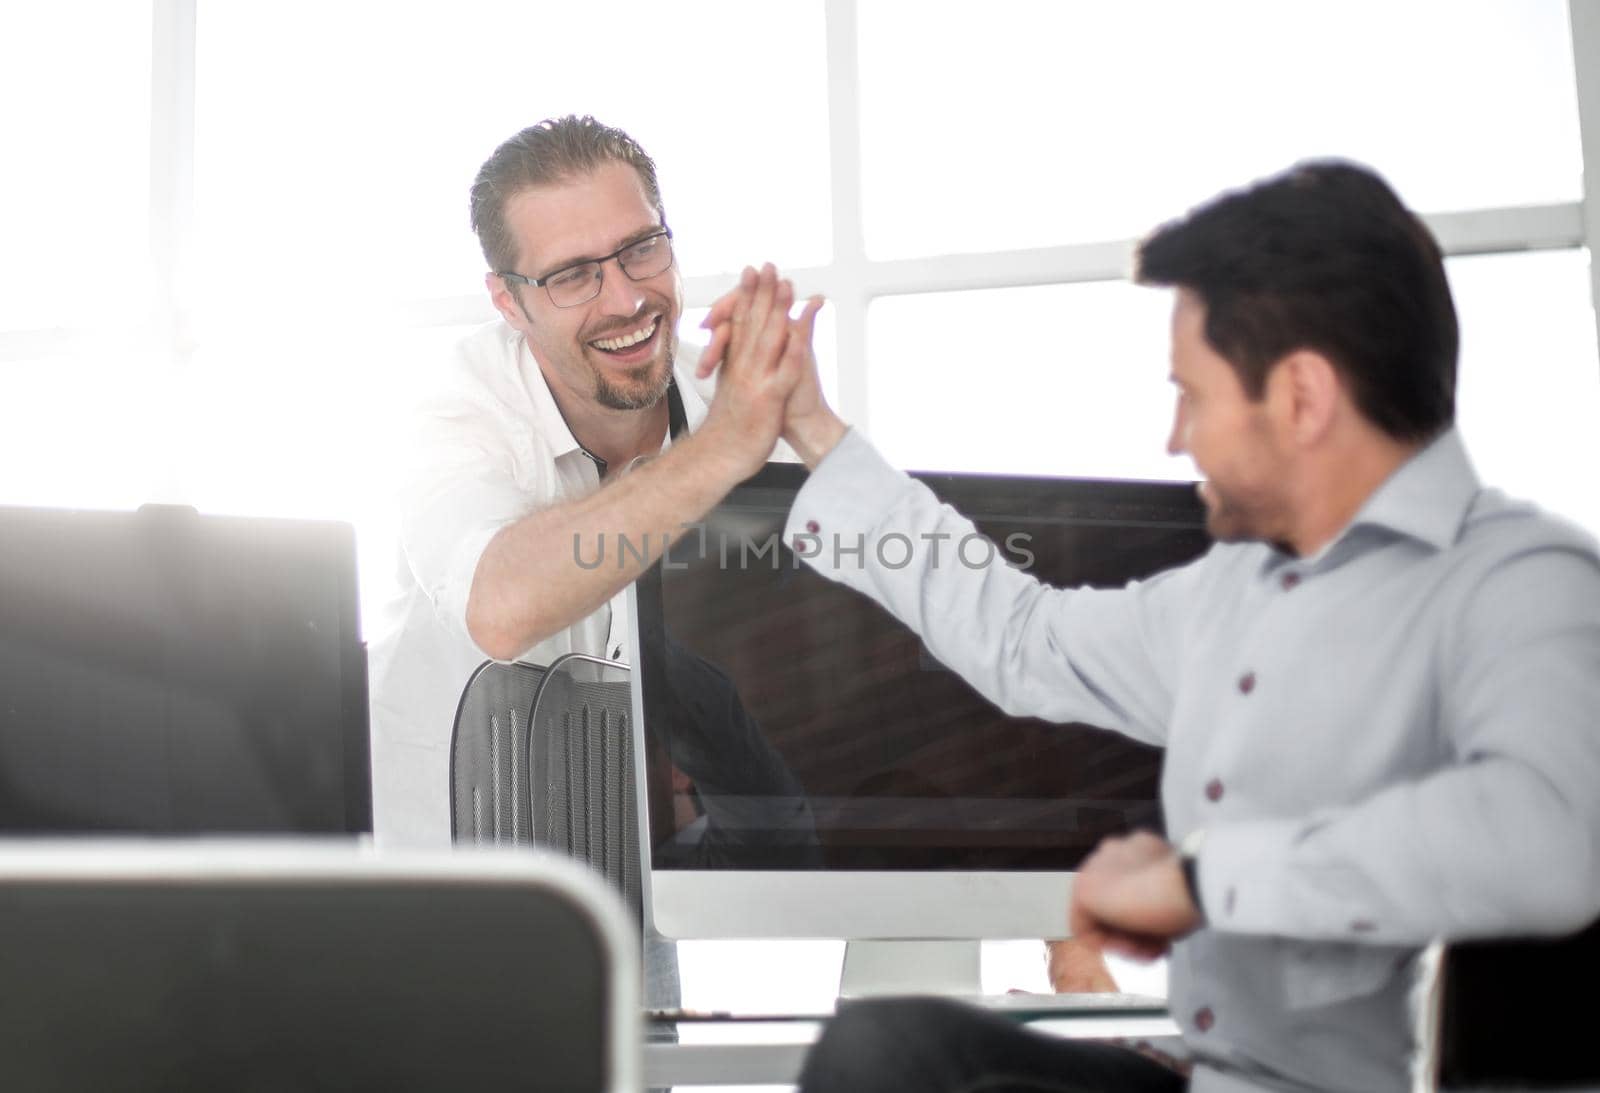 employees give each other a high five over the computer Desk by asdf